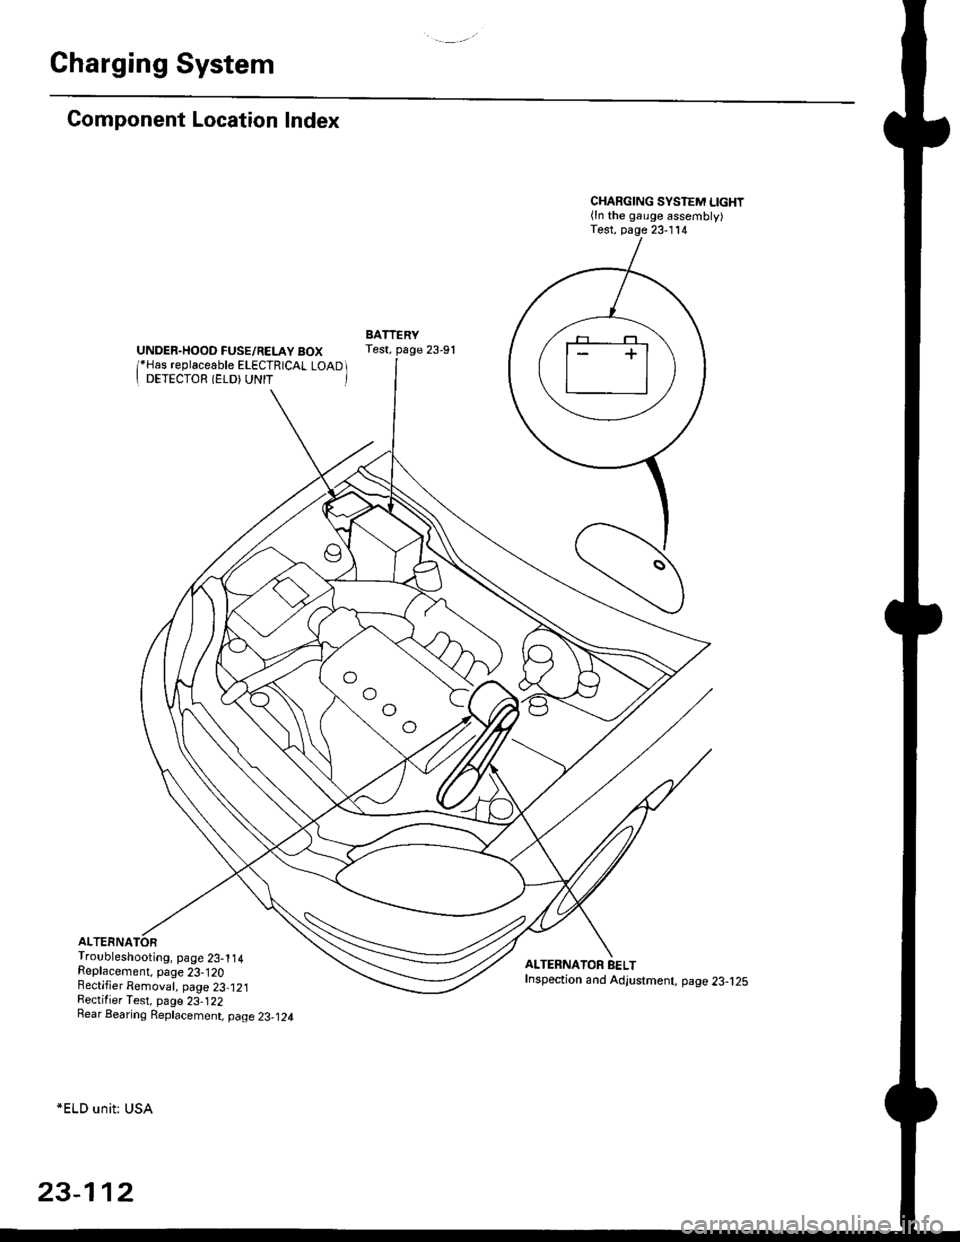 HONDA CIVIC 1996 6.G Owners Manual Charging System
Component Location Index
UNDER.HOOD FUSE/RELAY BOX/*Has replaceable ELECTRICAL LOAD II DETECTOR (ELD) UNIT 
Troubleshooting, page 23-1 14Replacement, page 23-120Bectifier Removal, pag